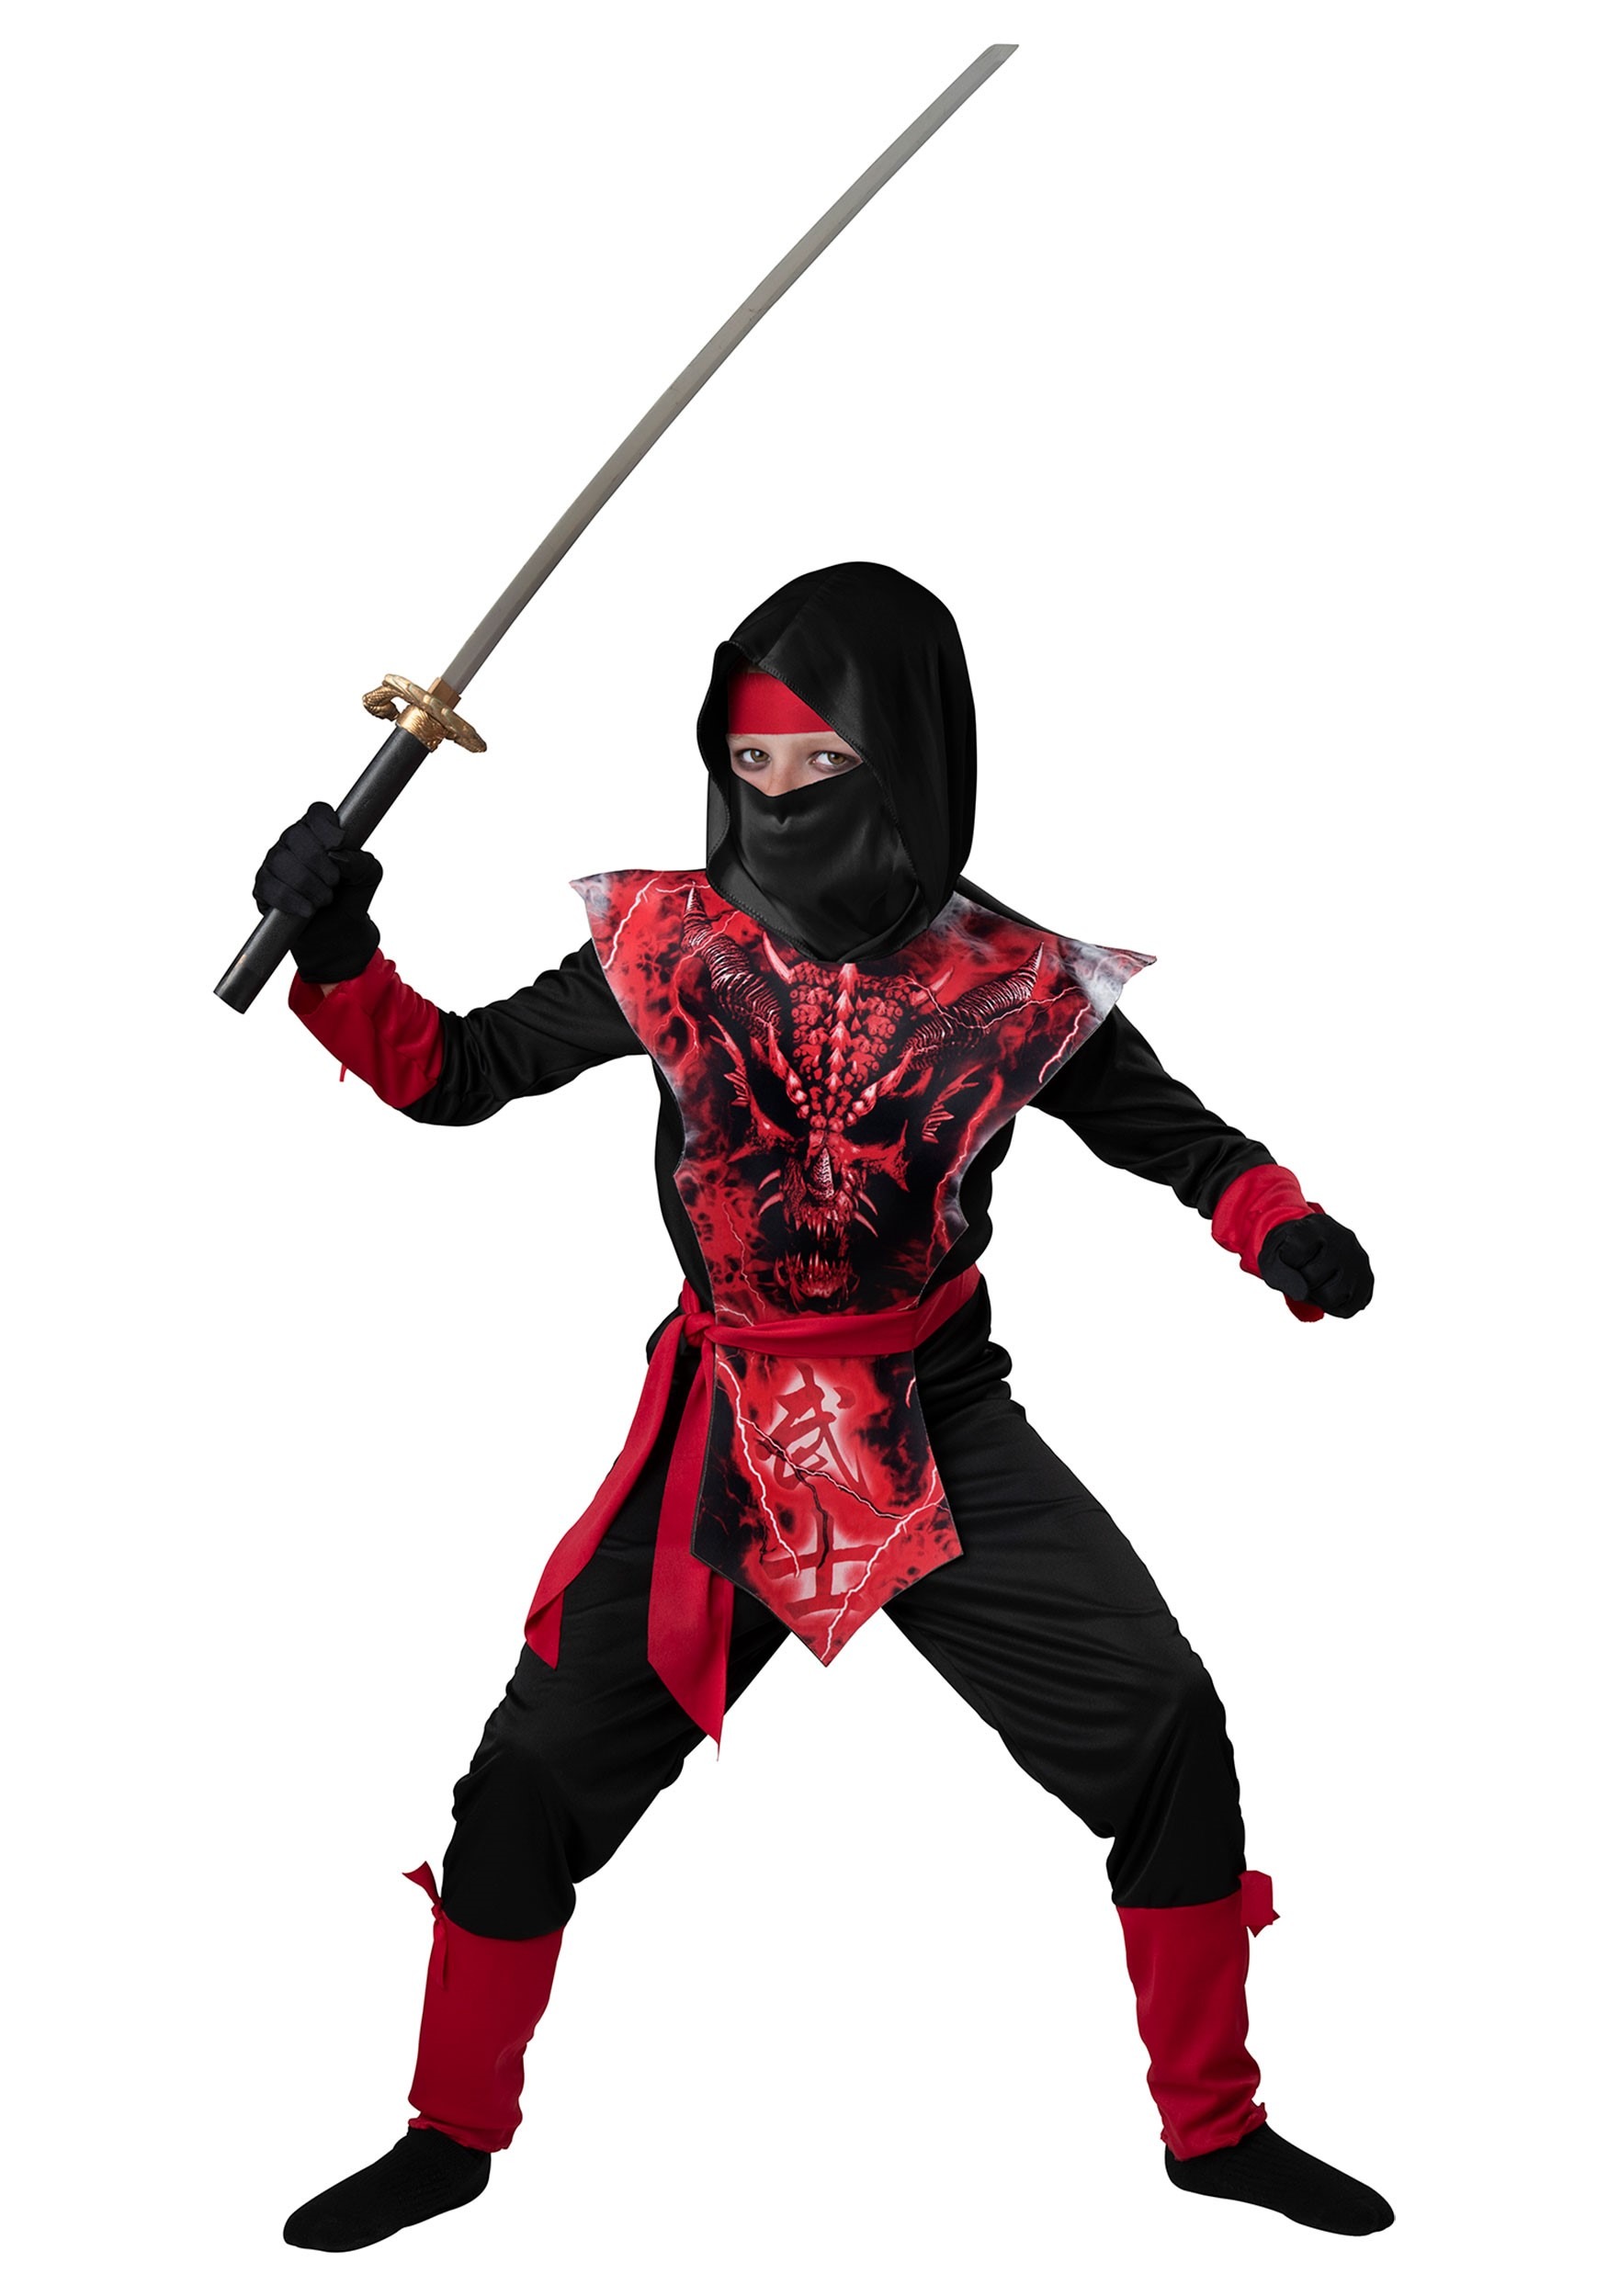 Photos - Fancy Dress Knight Fun World Death Skeleton  Costume for Boys Black/Red IN171276 